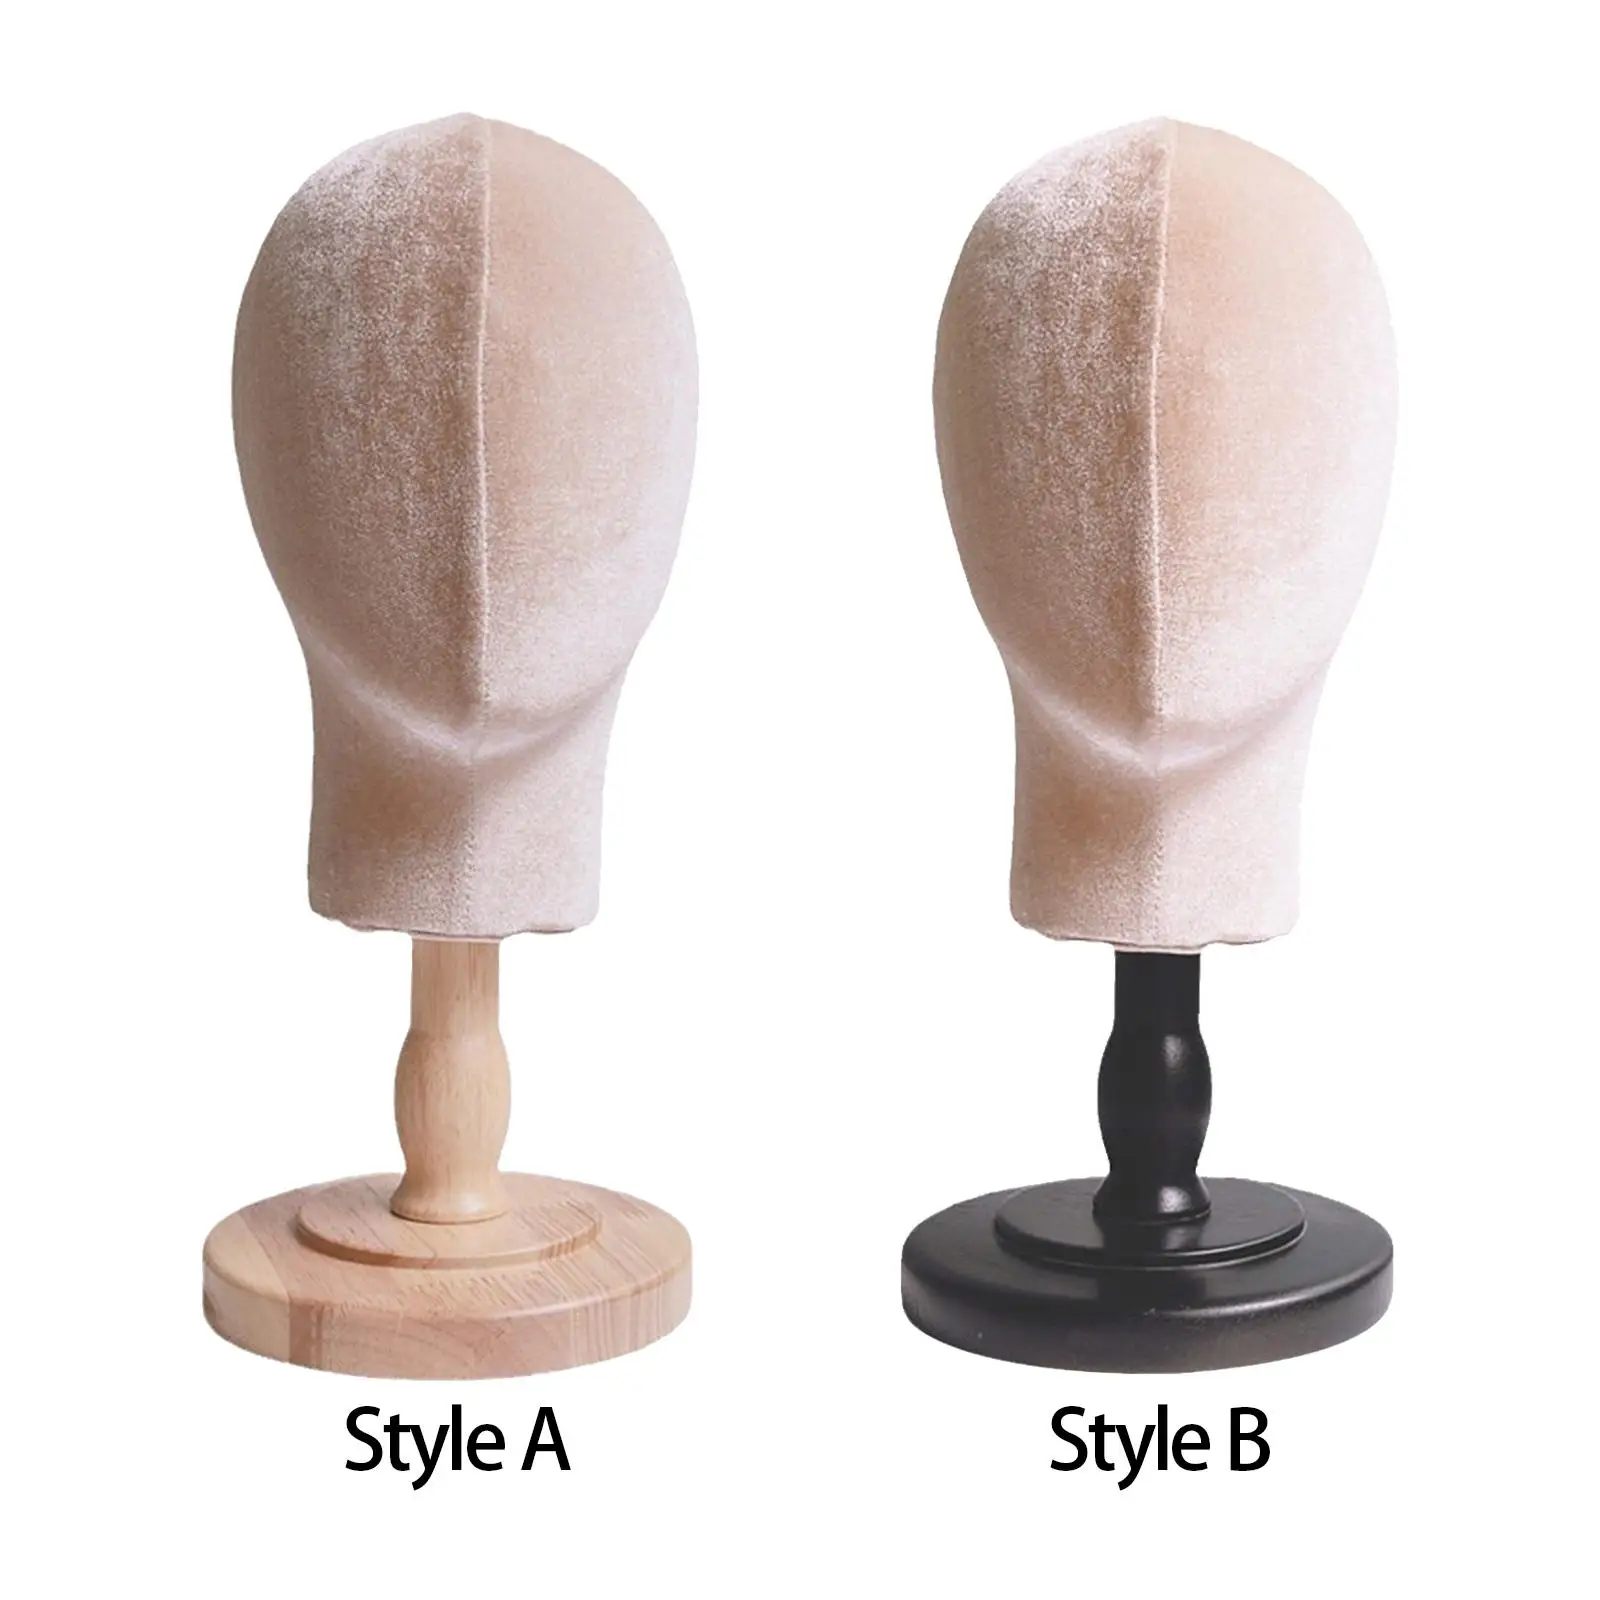 

Wig Head Model Wig Mannequin Head with Wood Base Fashion Wig Hat Display Stand Holder for Hairdresser Training Hats Jewellery